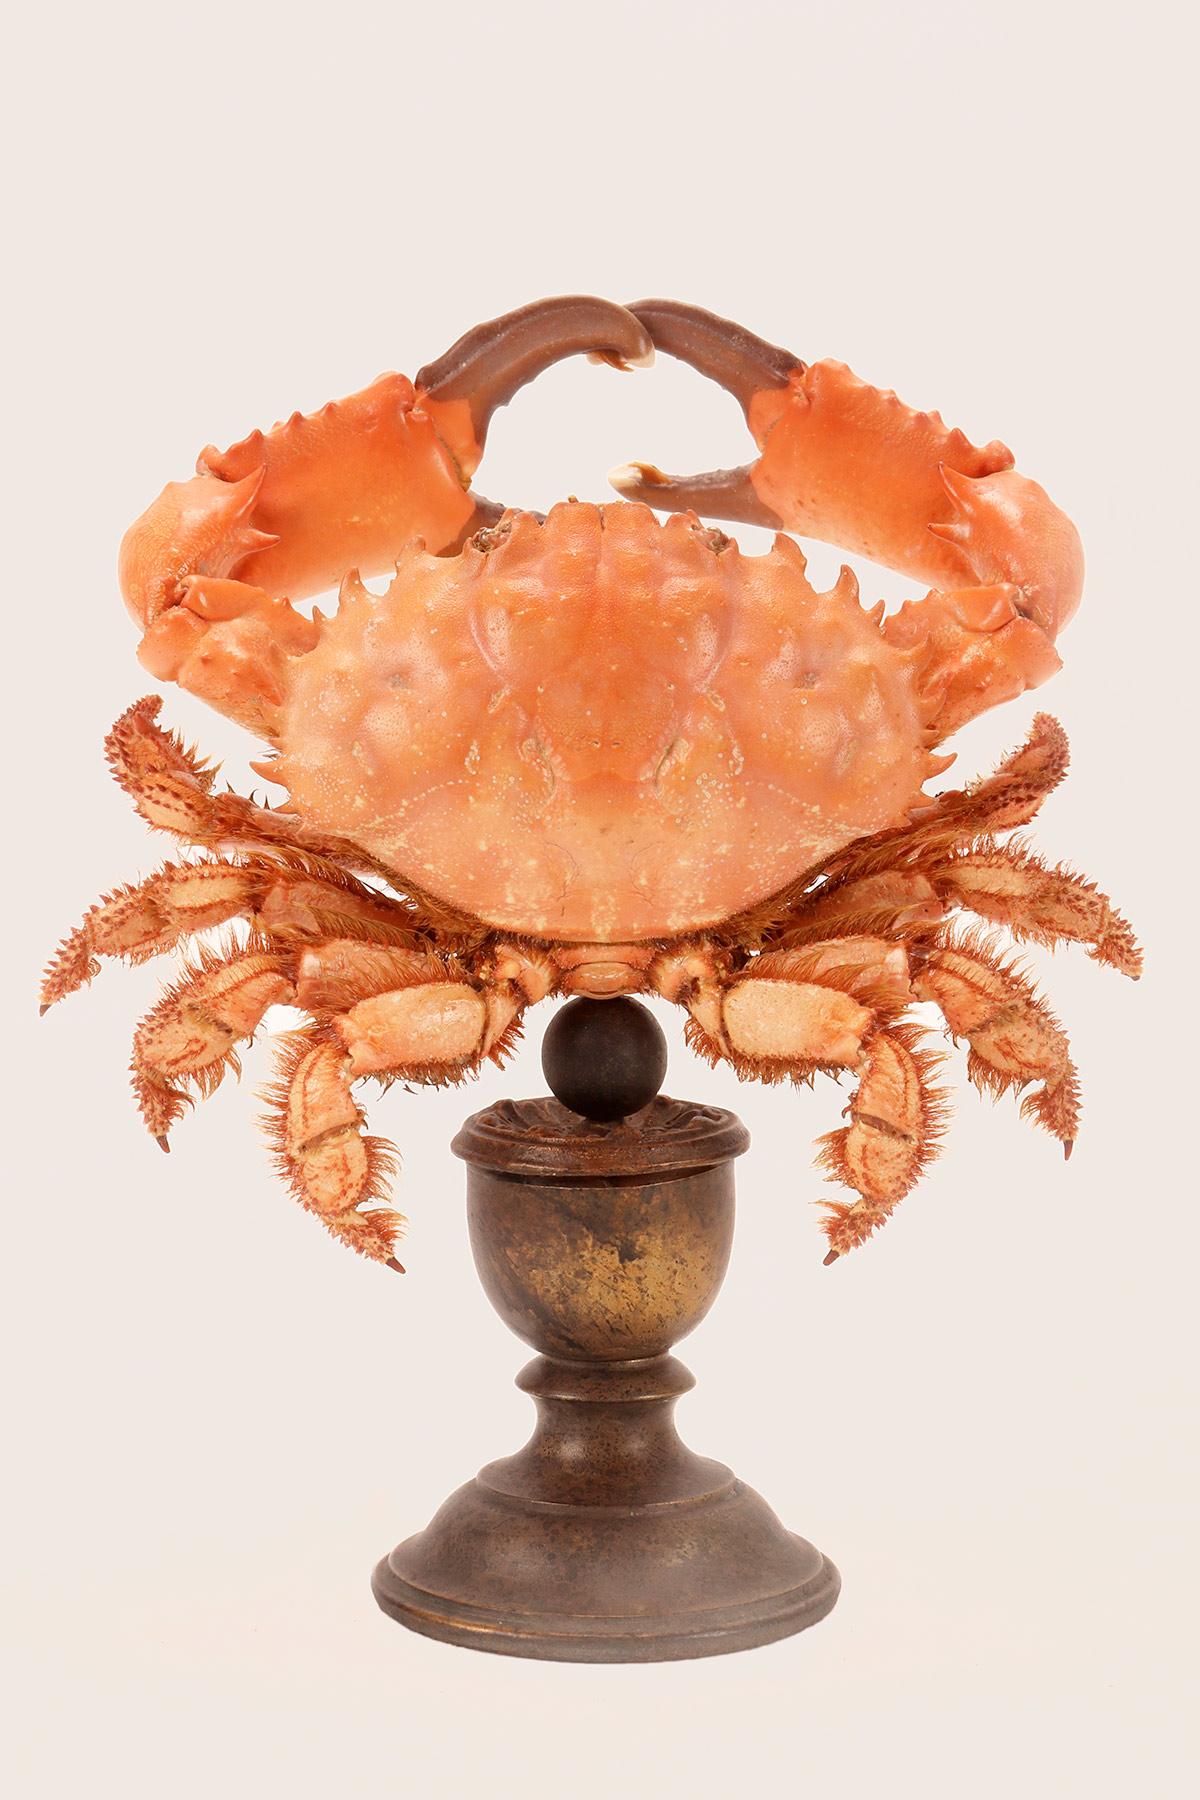 A pair of marine specimen crabs. The specimen, Splendid Round Red Crab (Etisus Splendidus) is mounted on a vase-shaped wooden base painted brown. Italy, late 19th century. (Also sold separately)